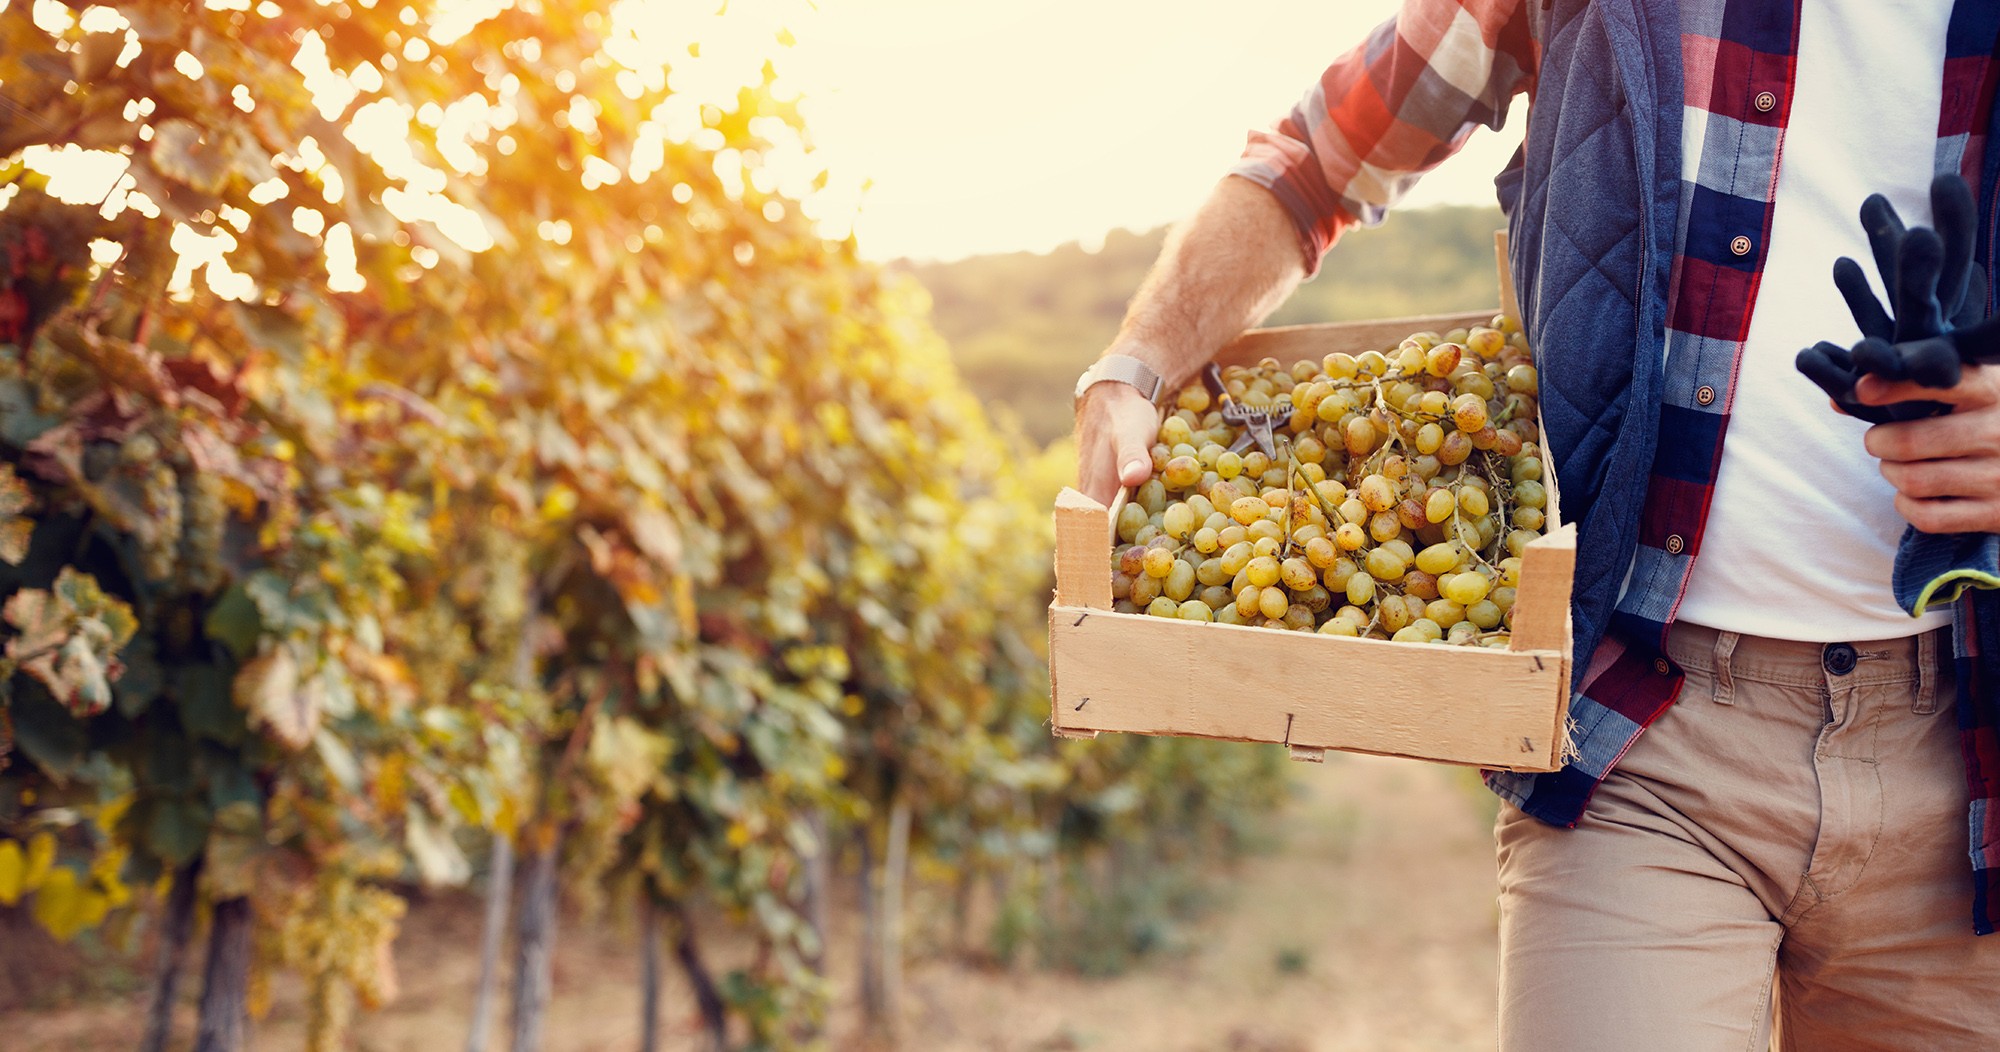 Man carrying box of freshly-picked white grapes